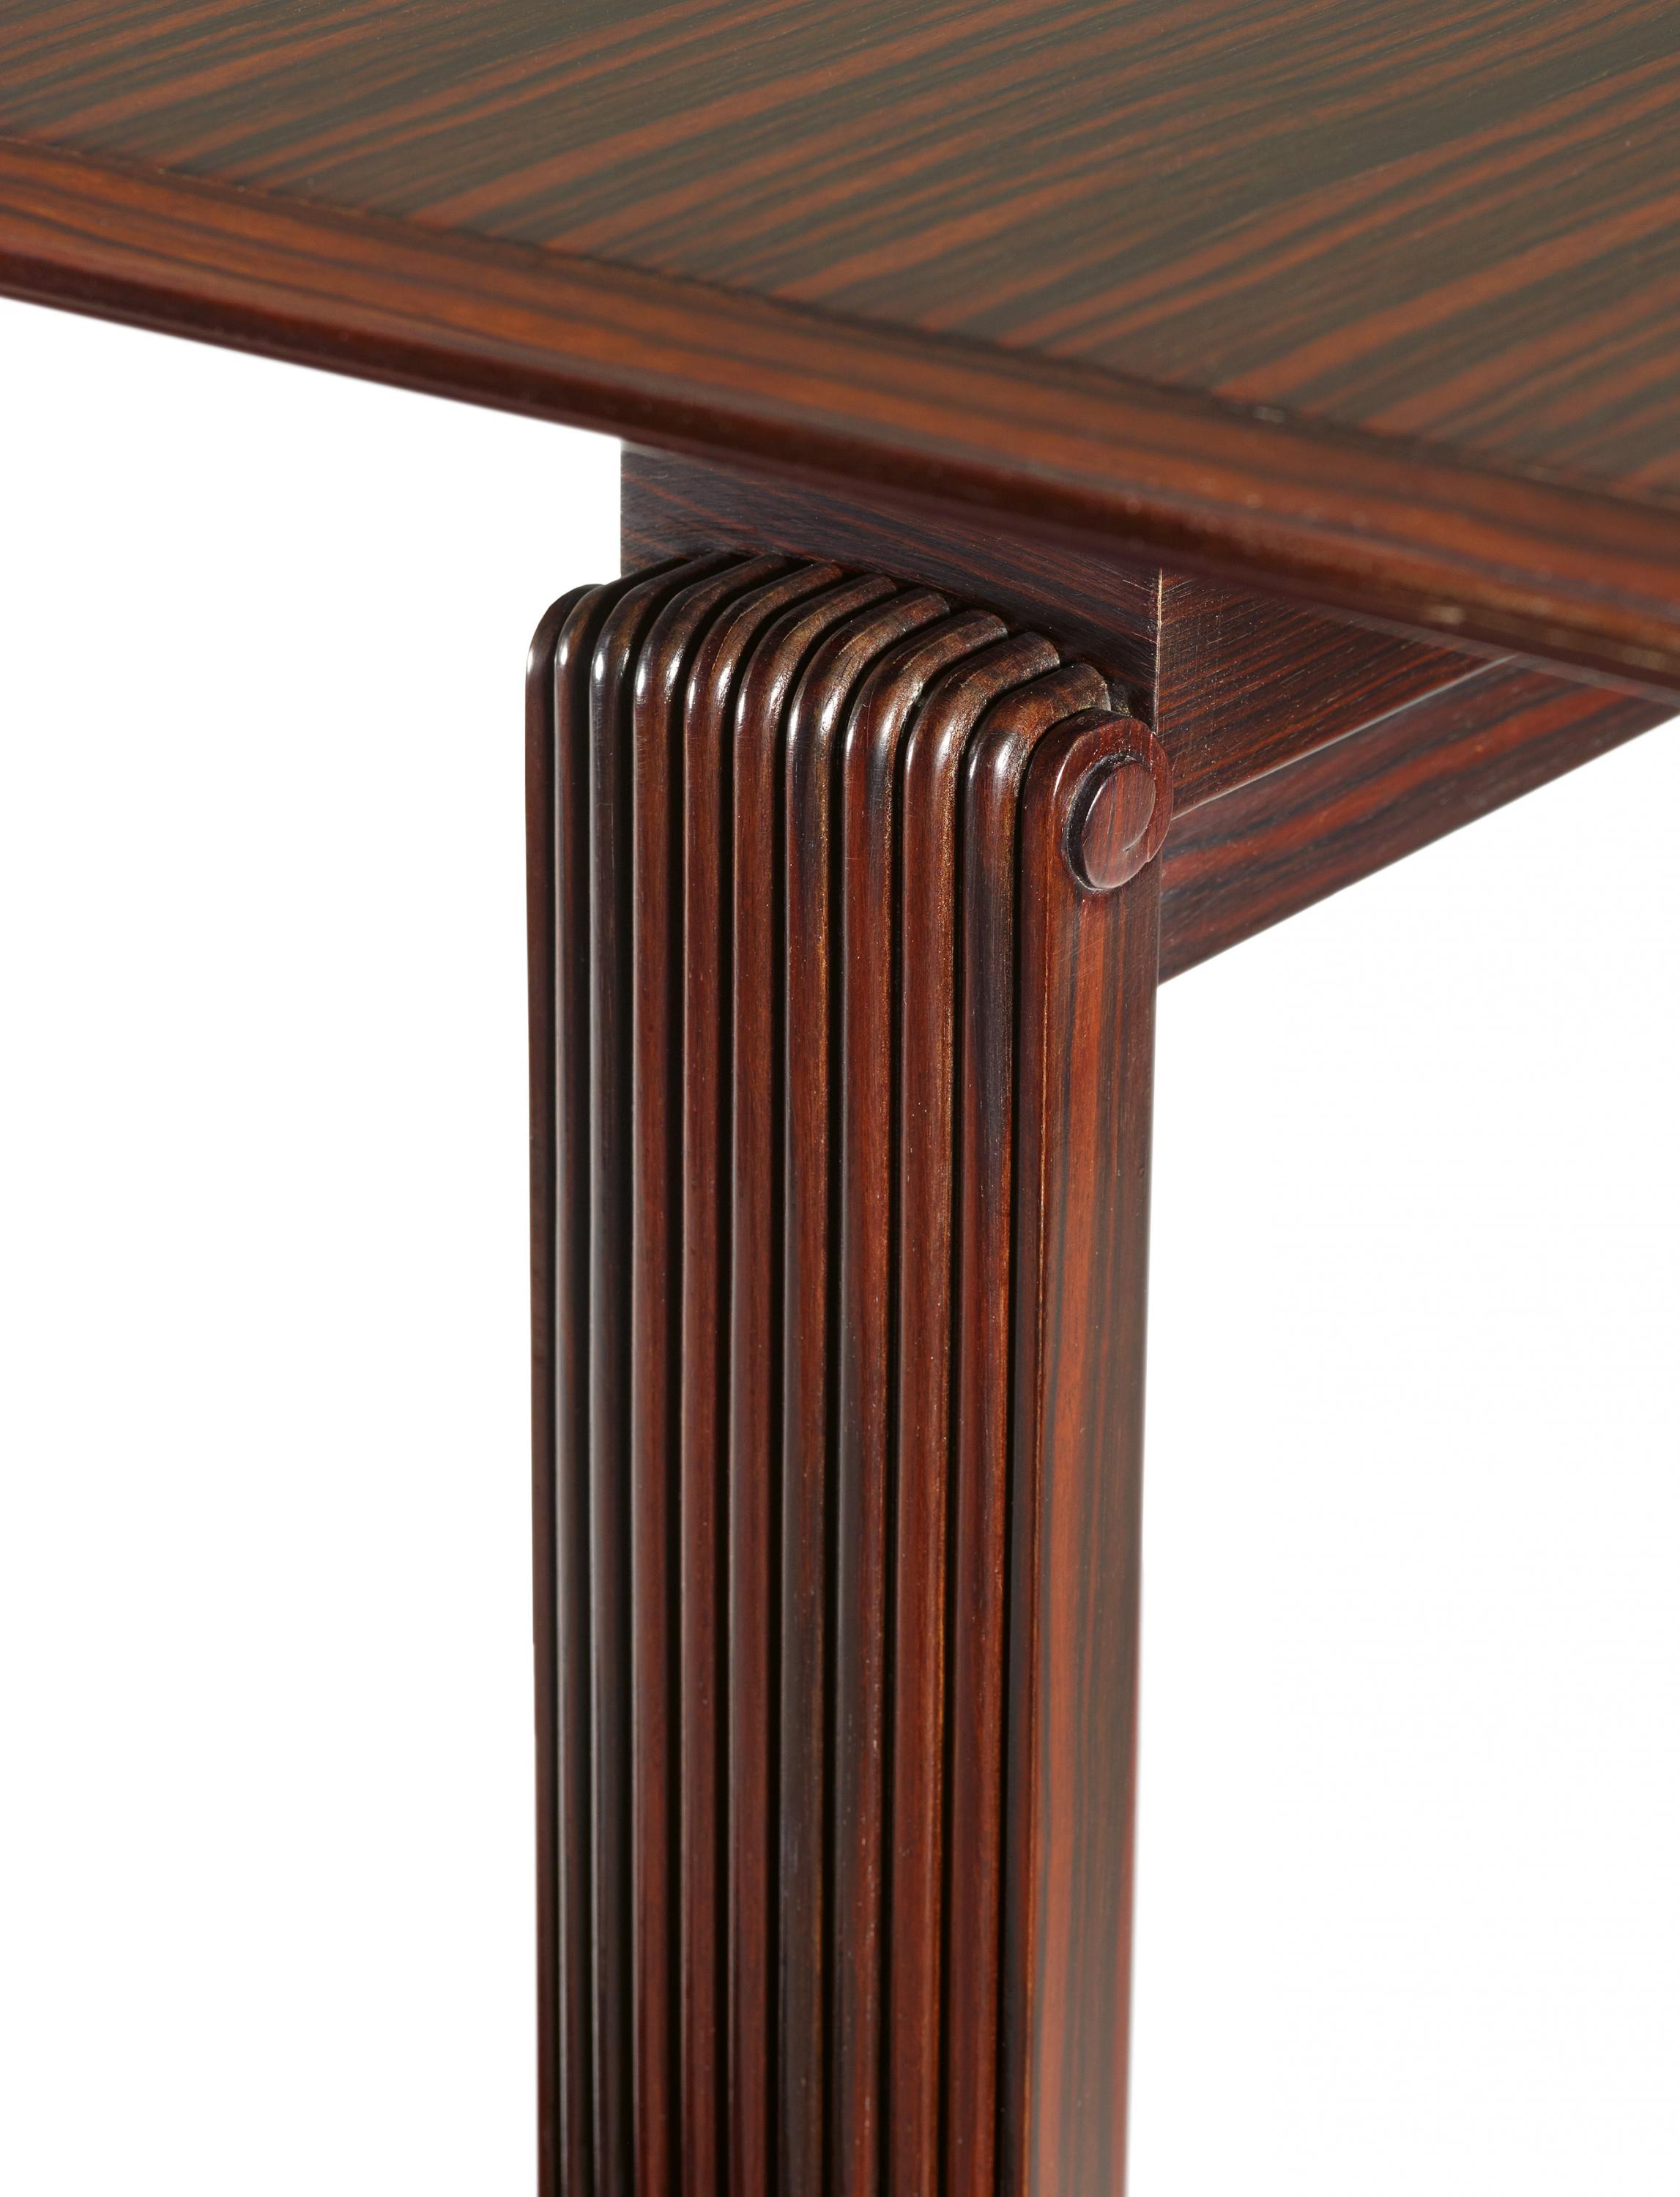 PAIR OF MACASSAR EBONY ART NOUVEAU SIDE TABLES OF MUSEUM-LIKE QUALITY, BLOCH MODEL. Ruhlmann, - Image 2 of 5